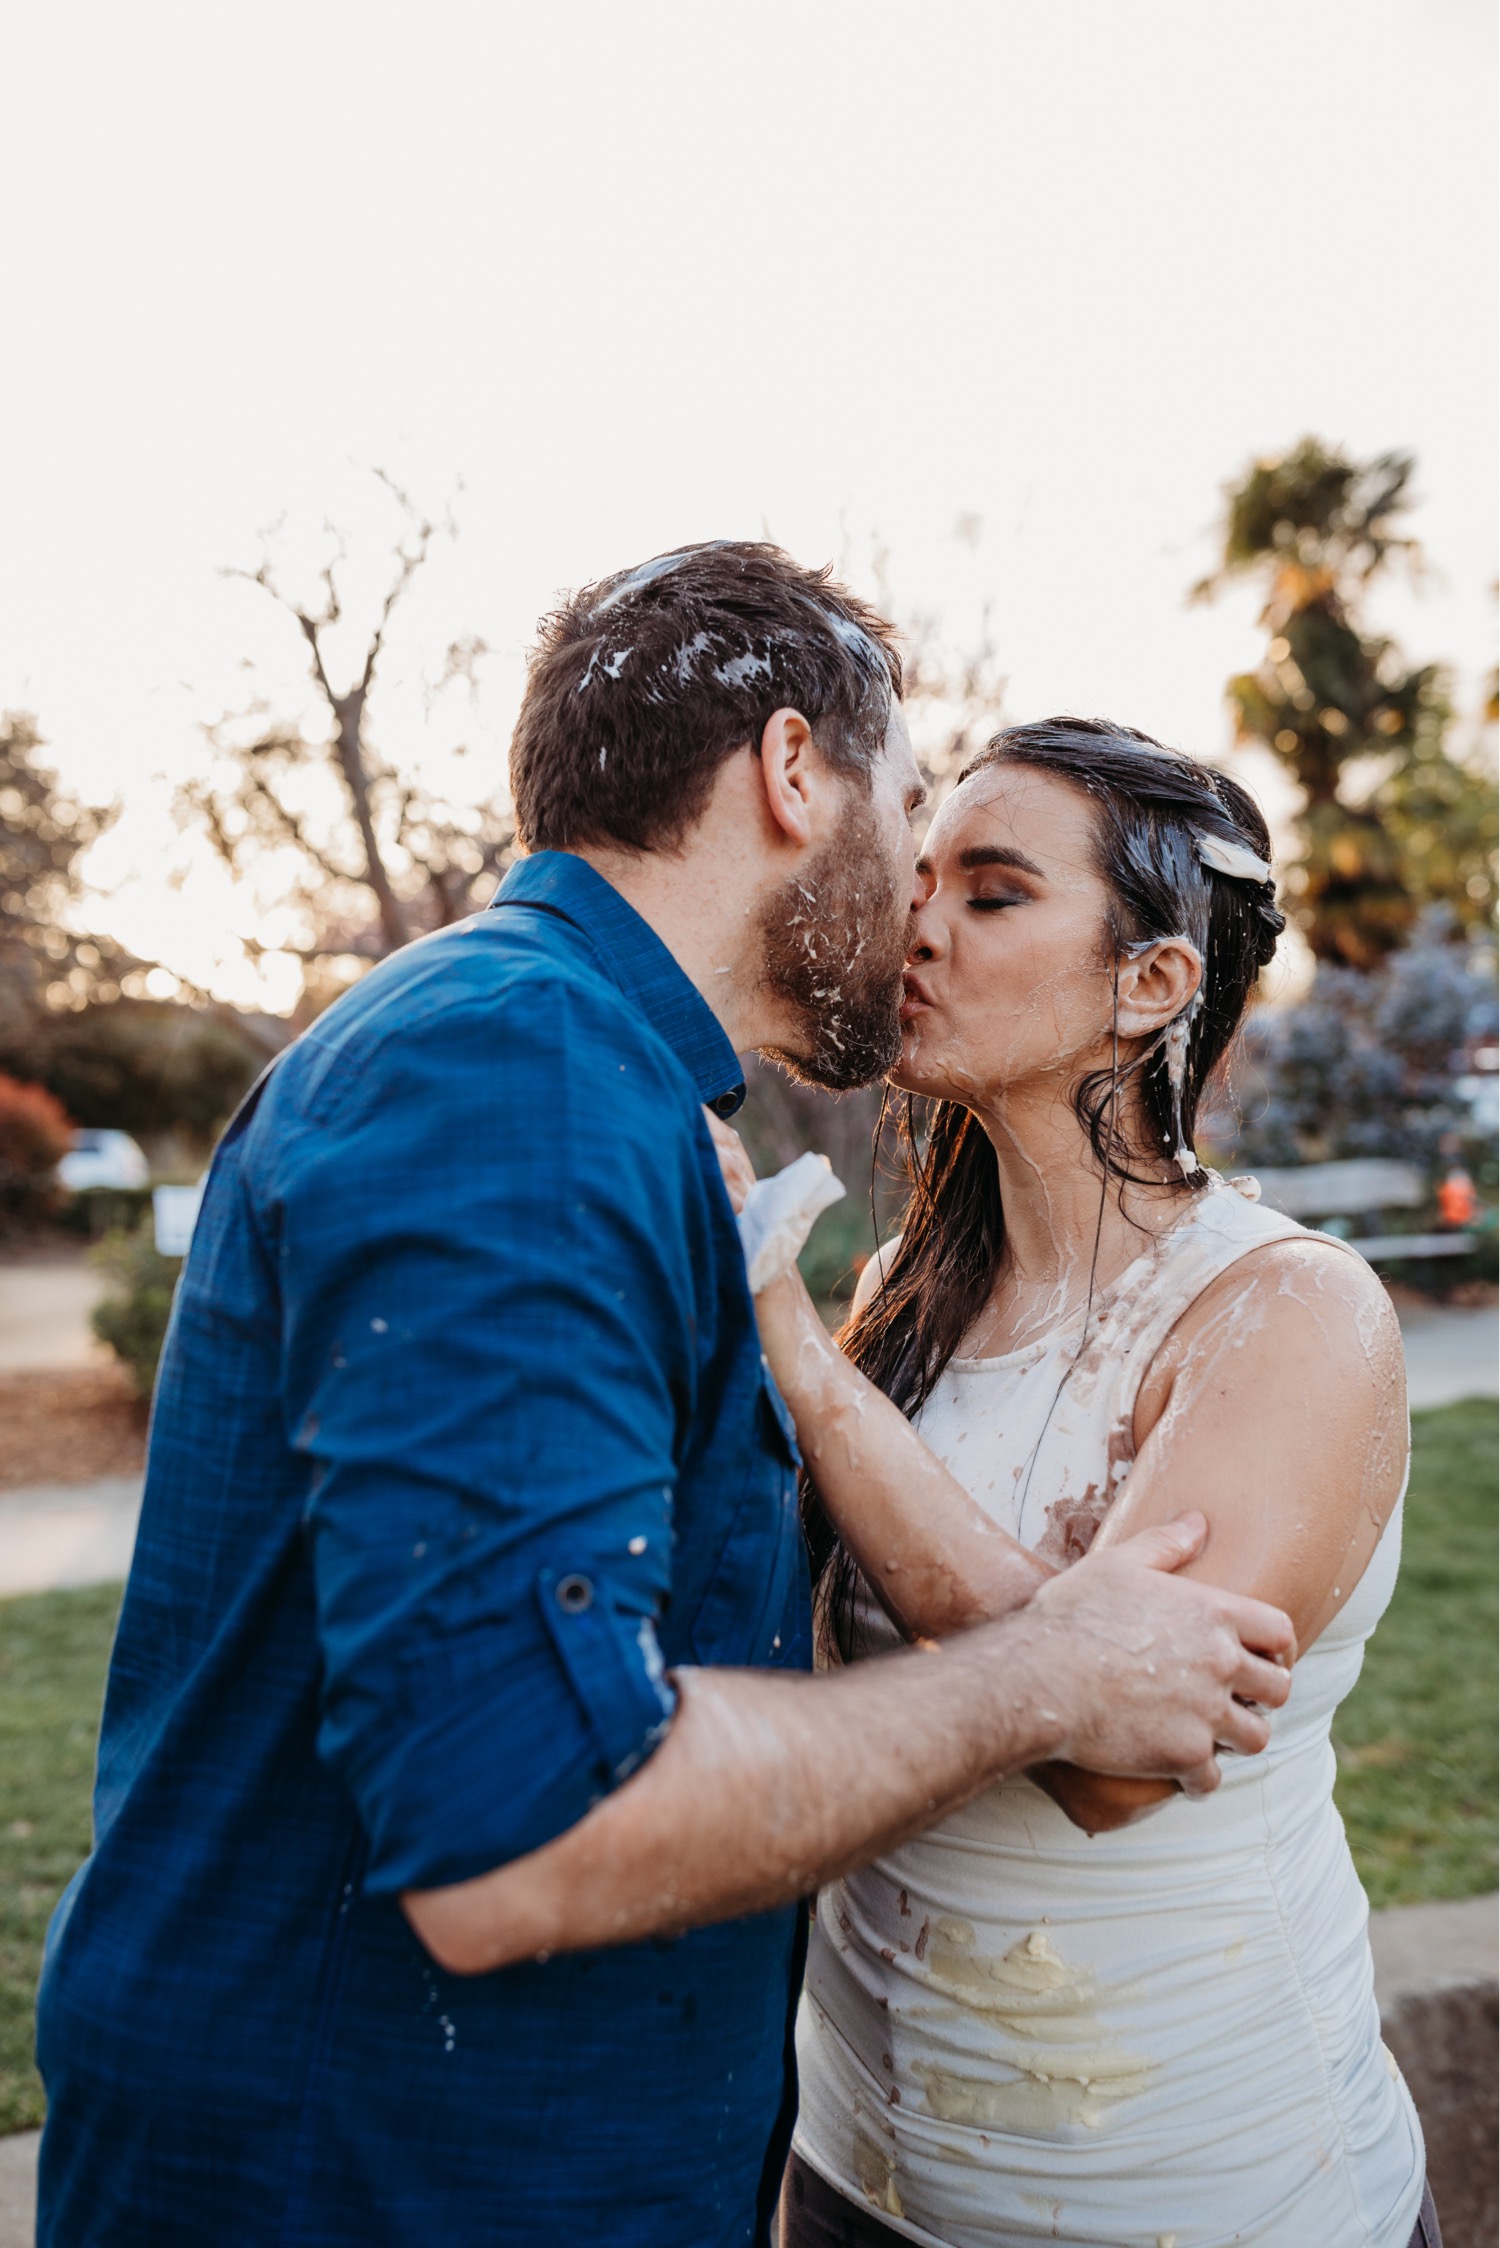 Couple kisses after an engagement photo ice cream food fight.